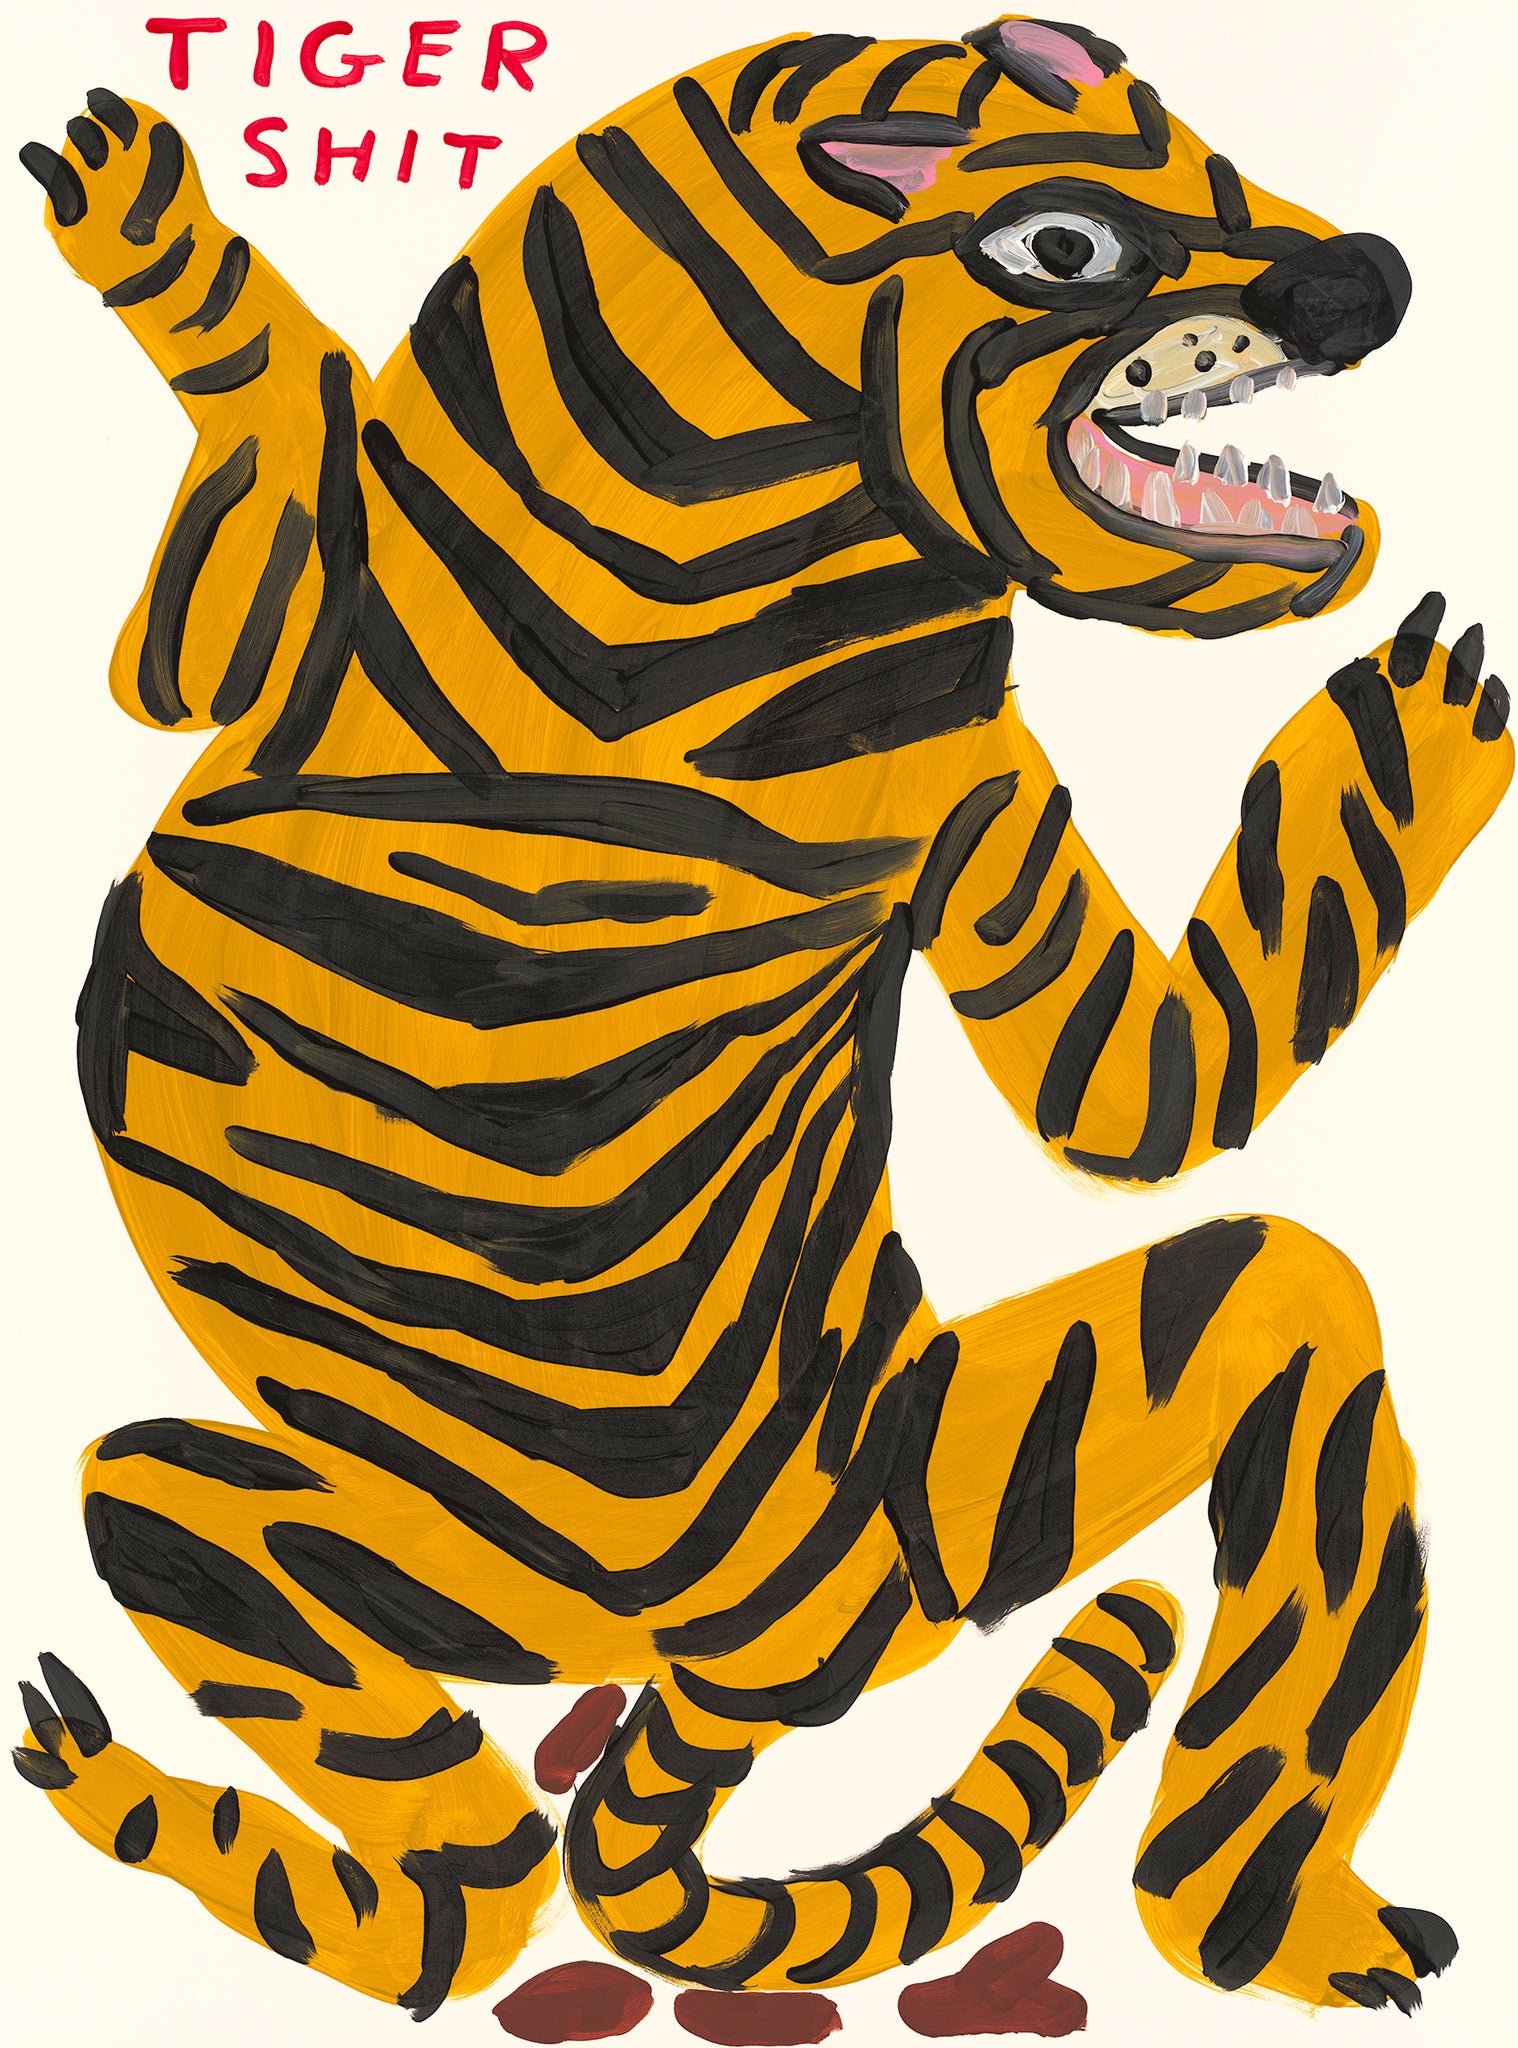 Tiger Shit, 2021 by David Shrigley is a limited edition, 21 colour screenprint with a varnish overlay. Discover the full collection of available artworks at Jealous. Purchase online or explore more prints on the gallery website.